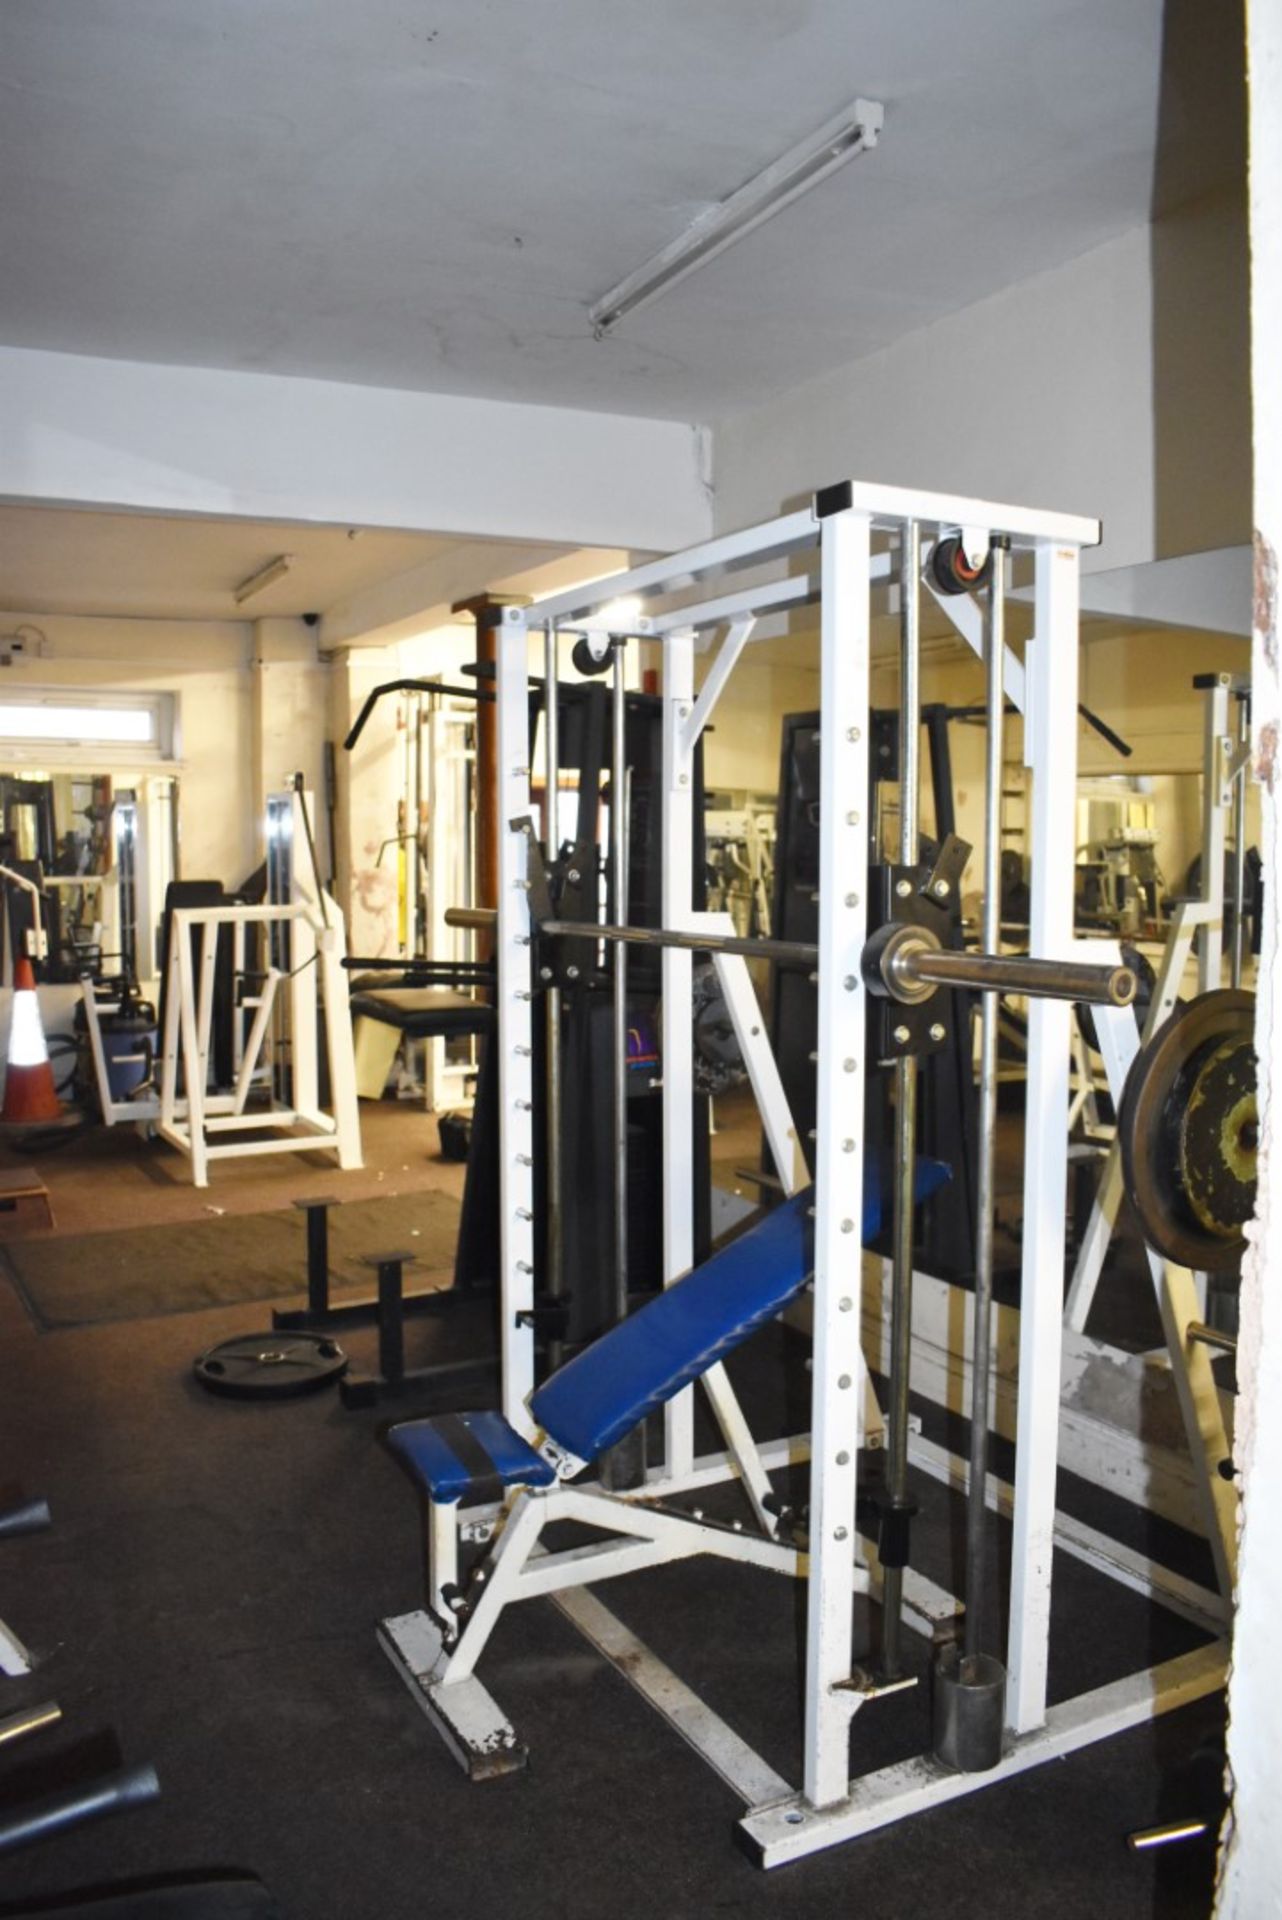 Contents of Bodybuilding and Strongman Gym - Includes Approx 30 Pieces of Gym Equipment, Floor Mats, - Image 85 of 95